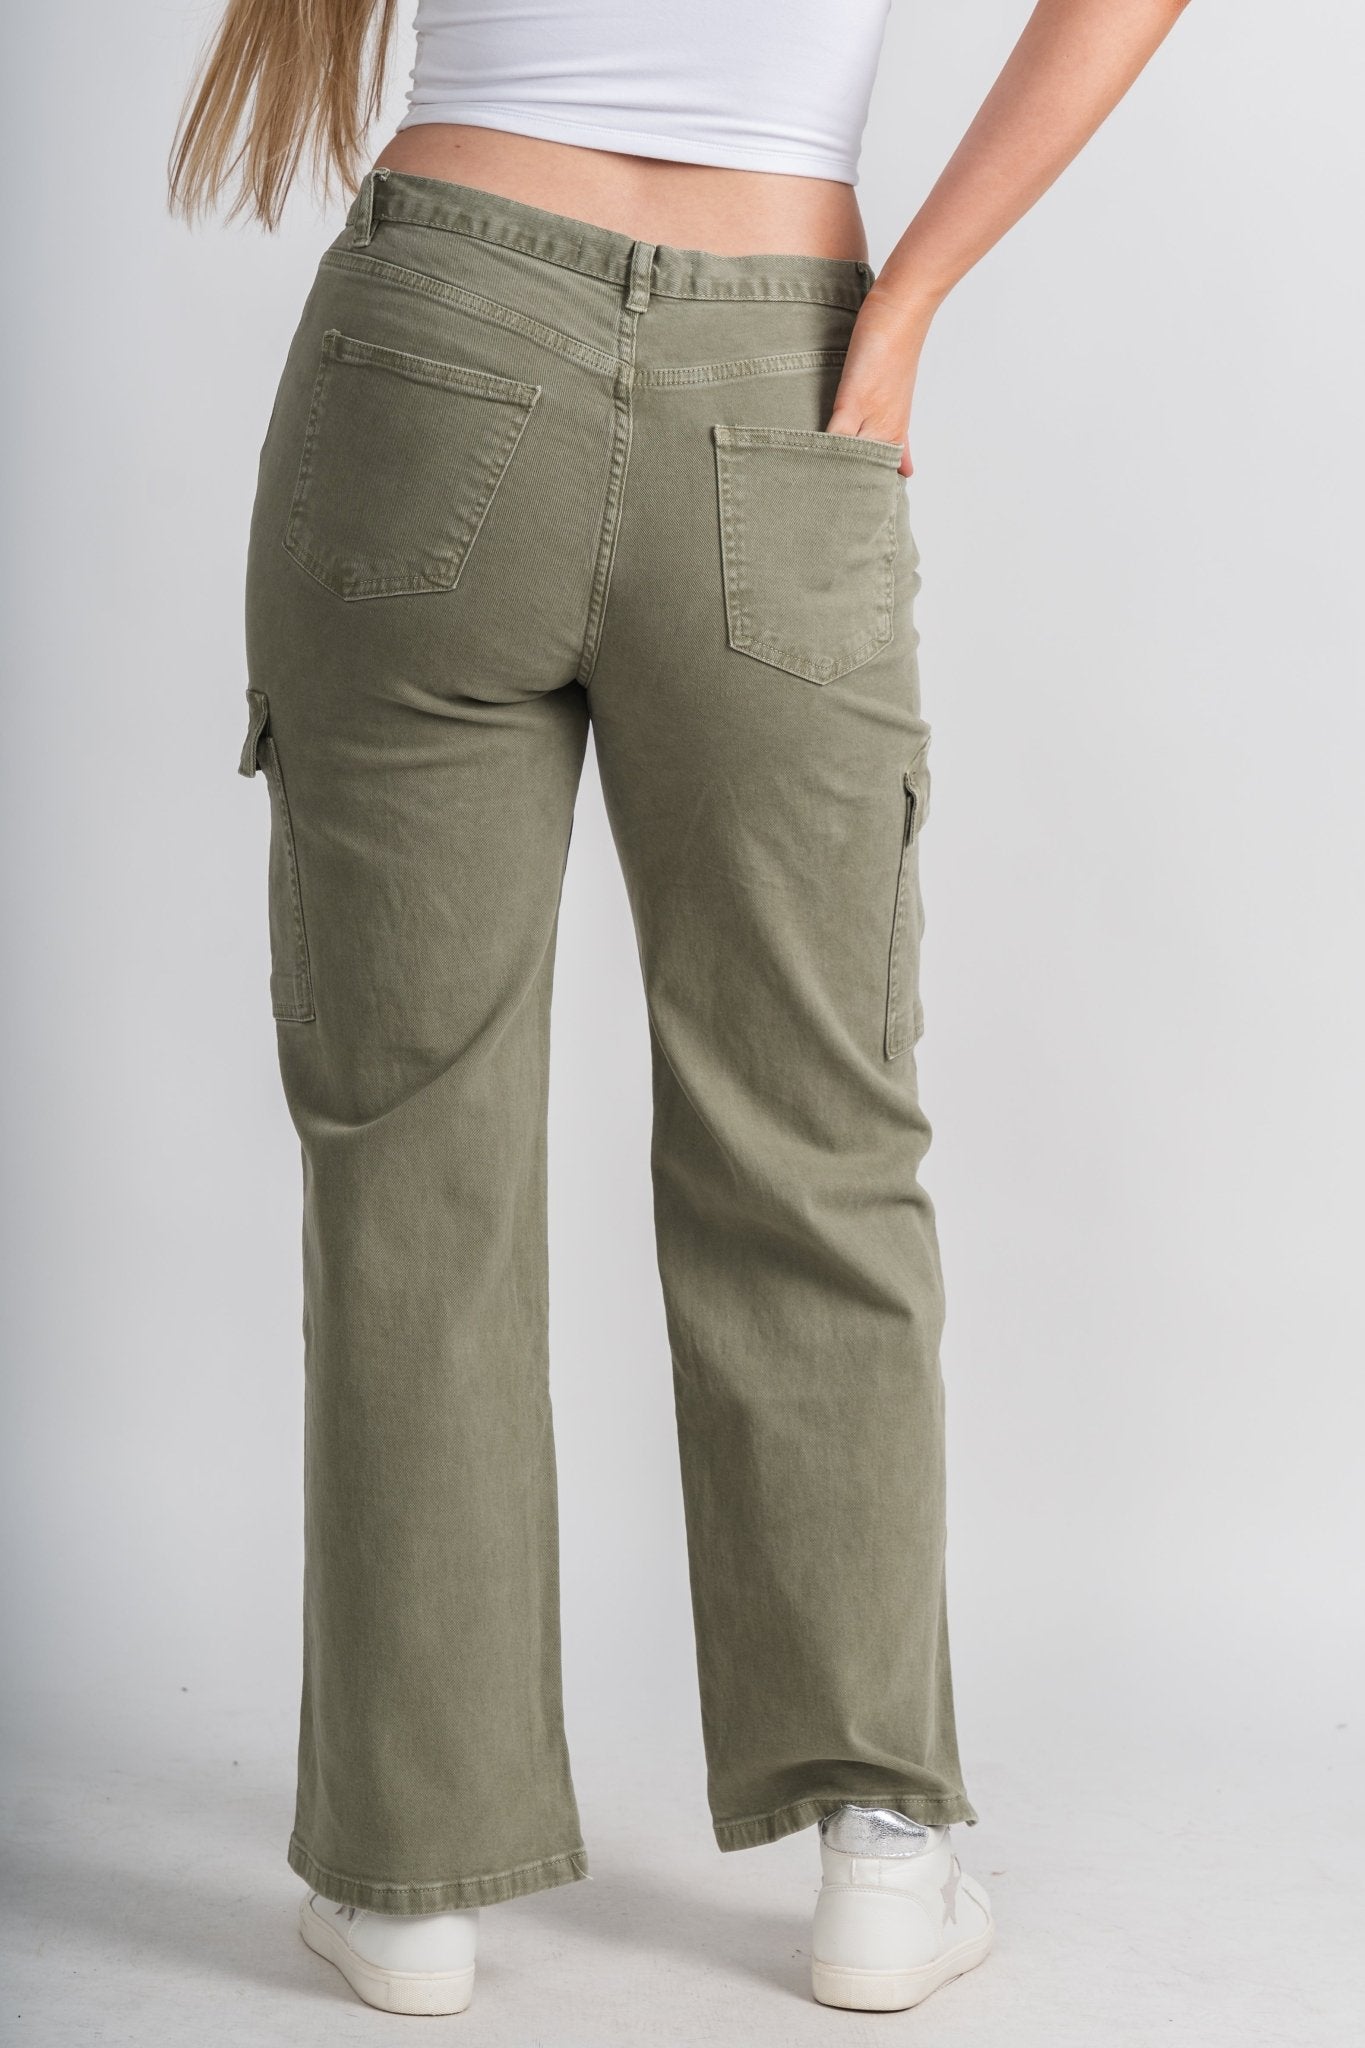 Cargo straight jeans olive green | Lush Fashion Lounge: boutique women's jeans, fashion jeans for women, affordable fashion jeans, cute boutique jeans